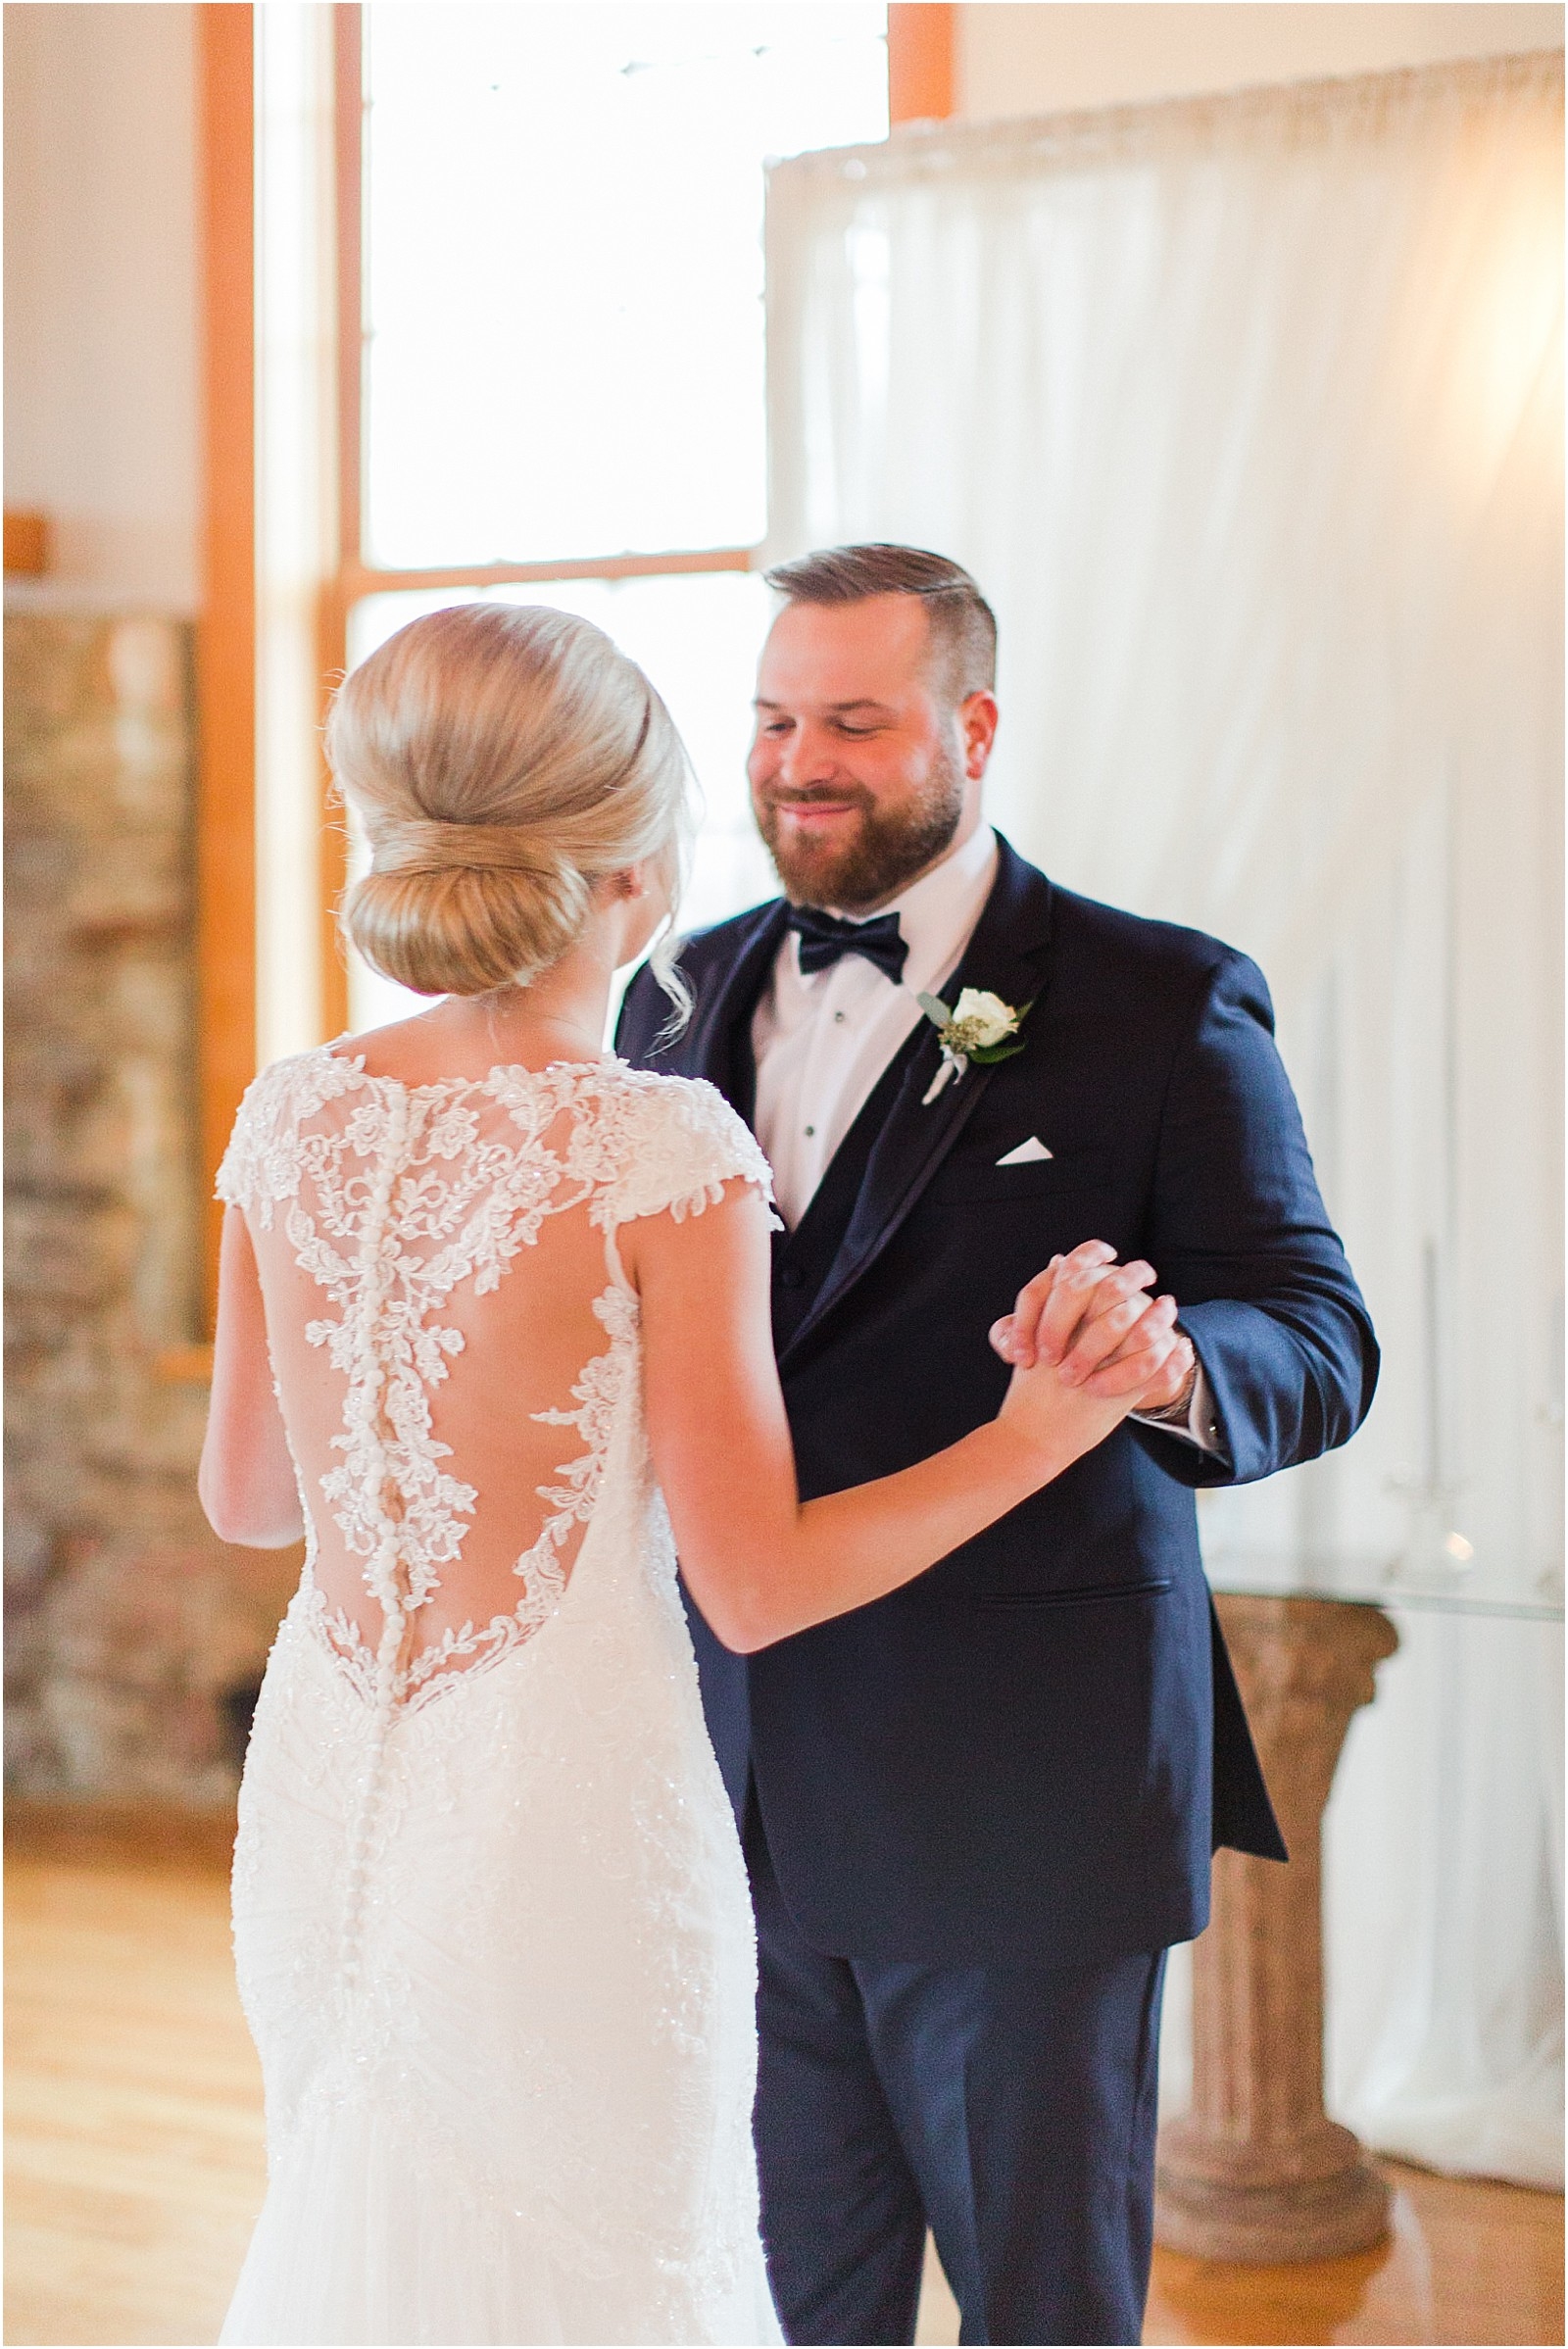 A Classic Winter Wedding in New Harmony | Rachel and Ryan | Bret and Brandie Photography 0054.jpg